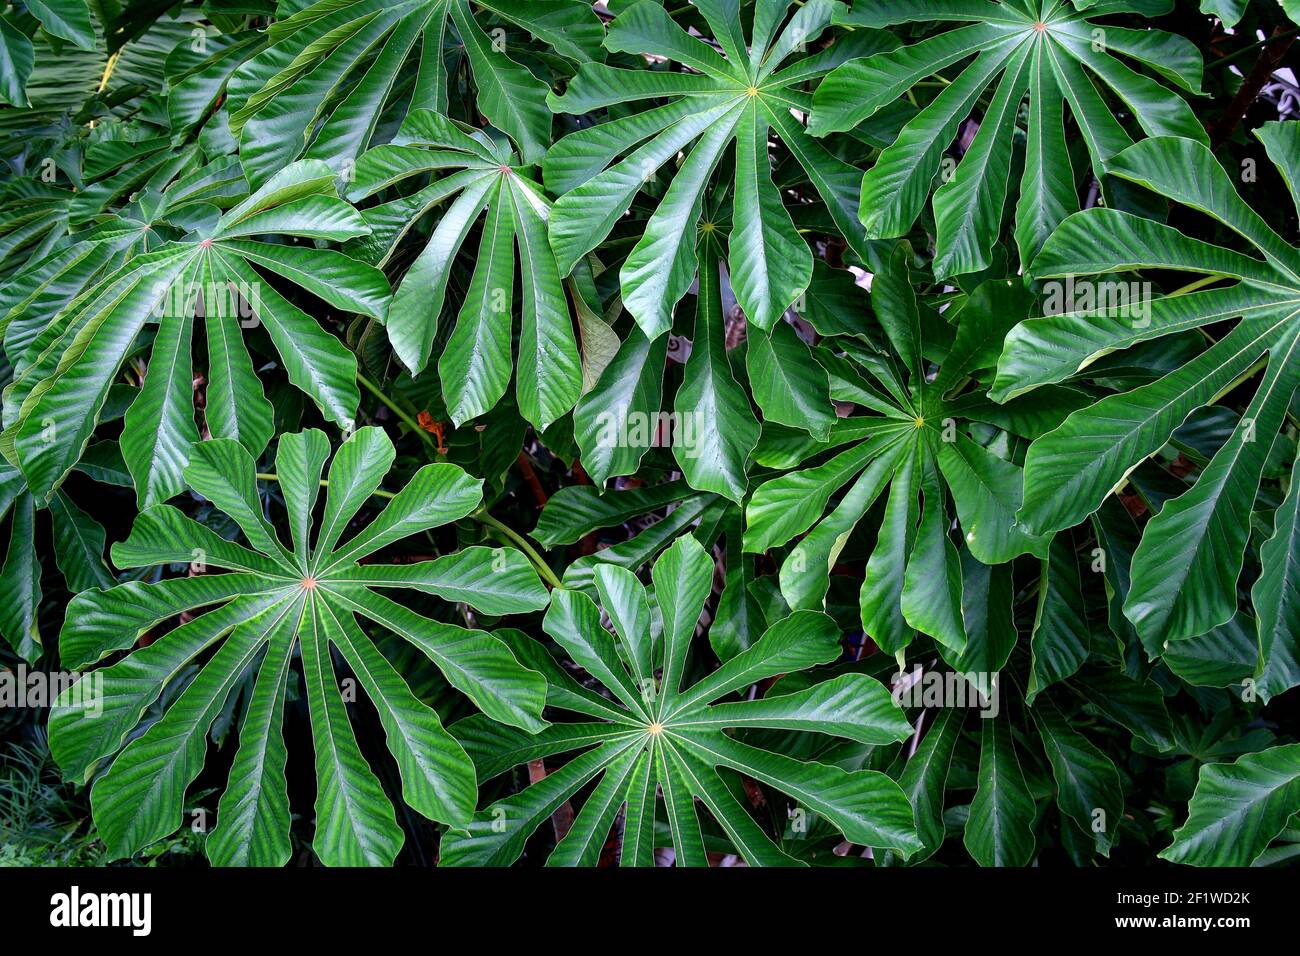 Large green leaves of a geometric shape as seen from above in a greenhouse Stock Photo